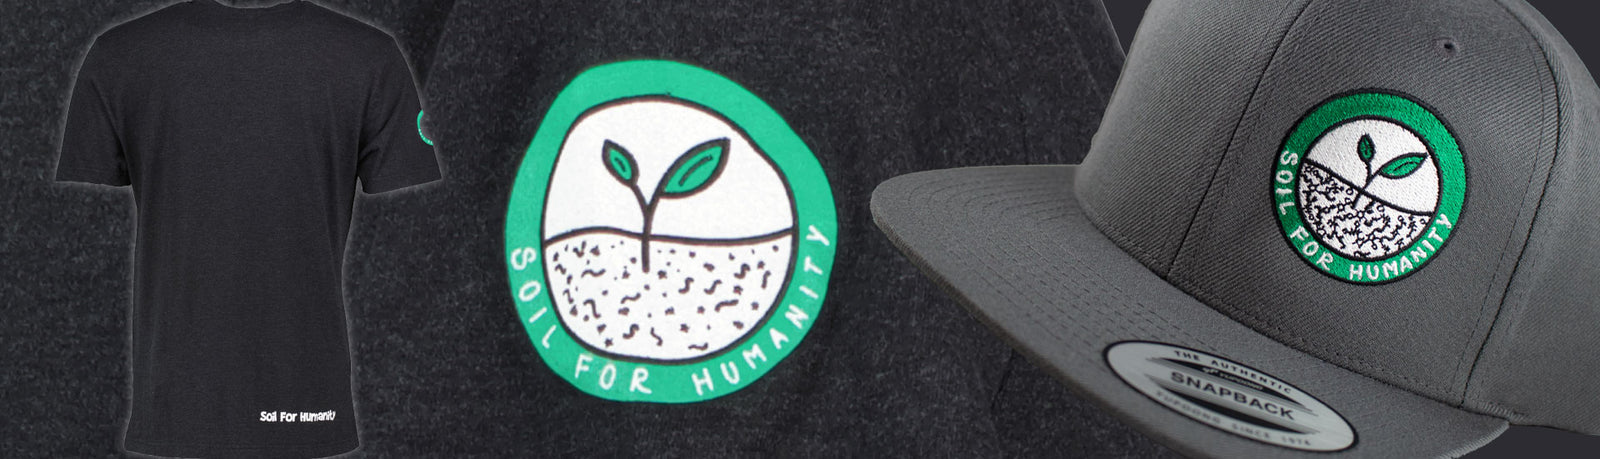 Soil For Humanity Apparel T-Shirts and Hats